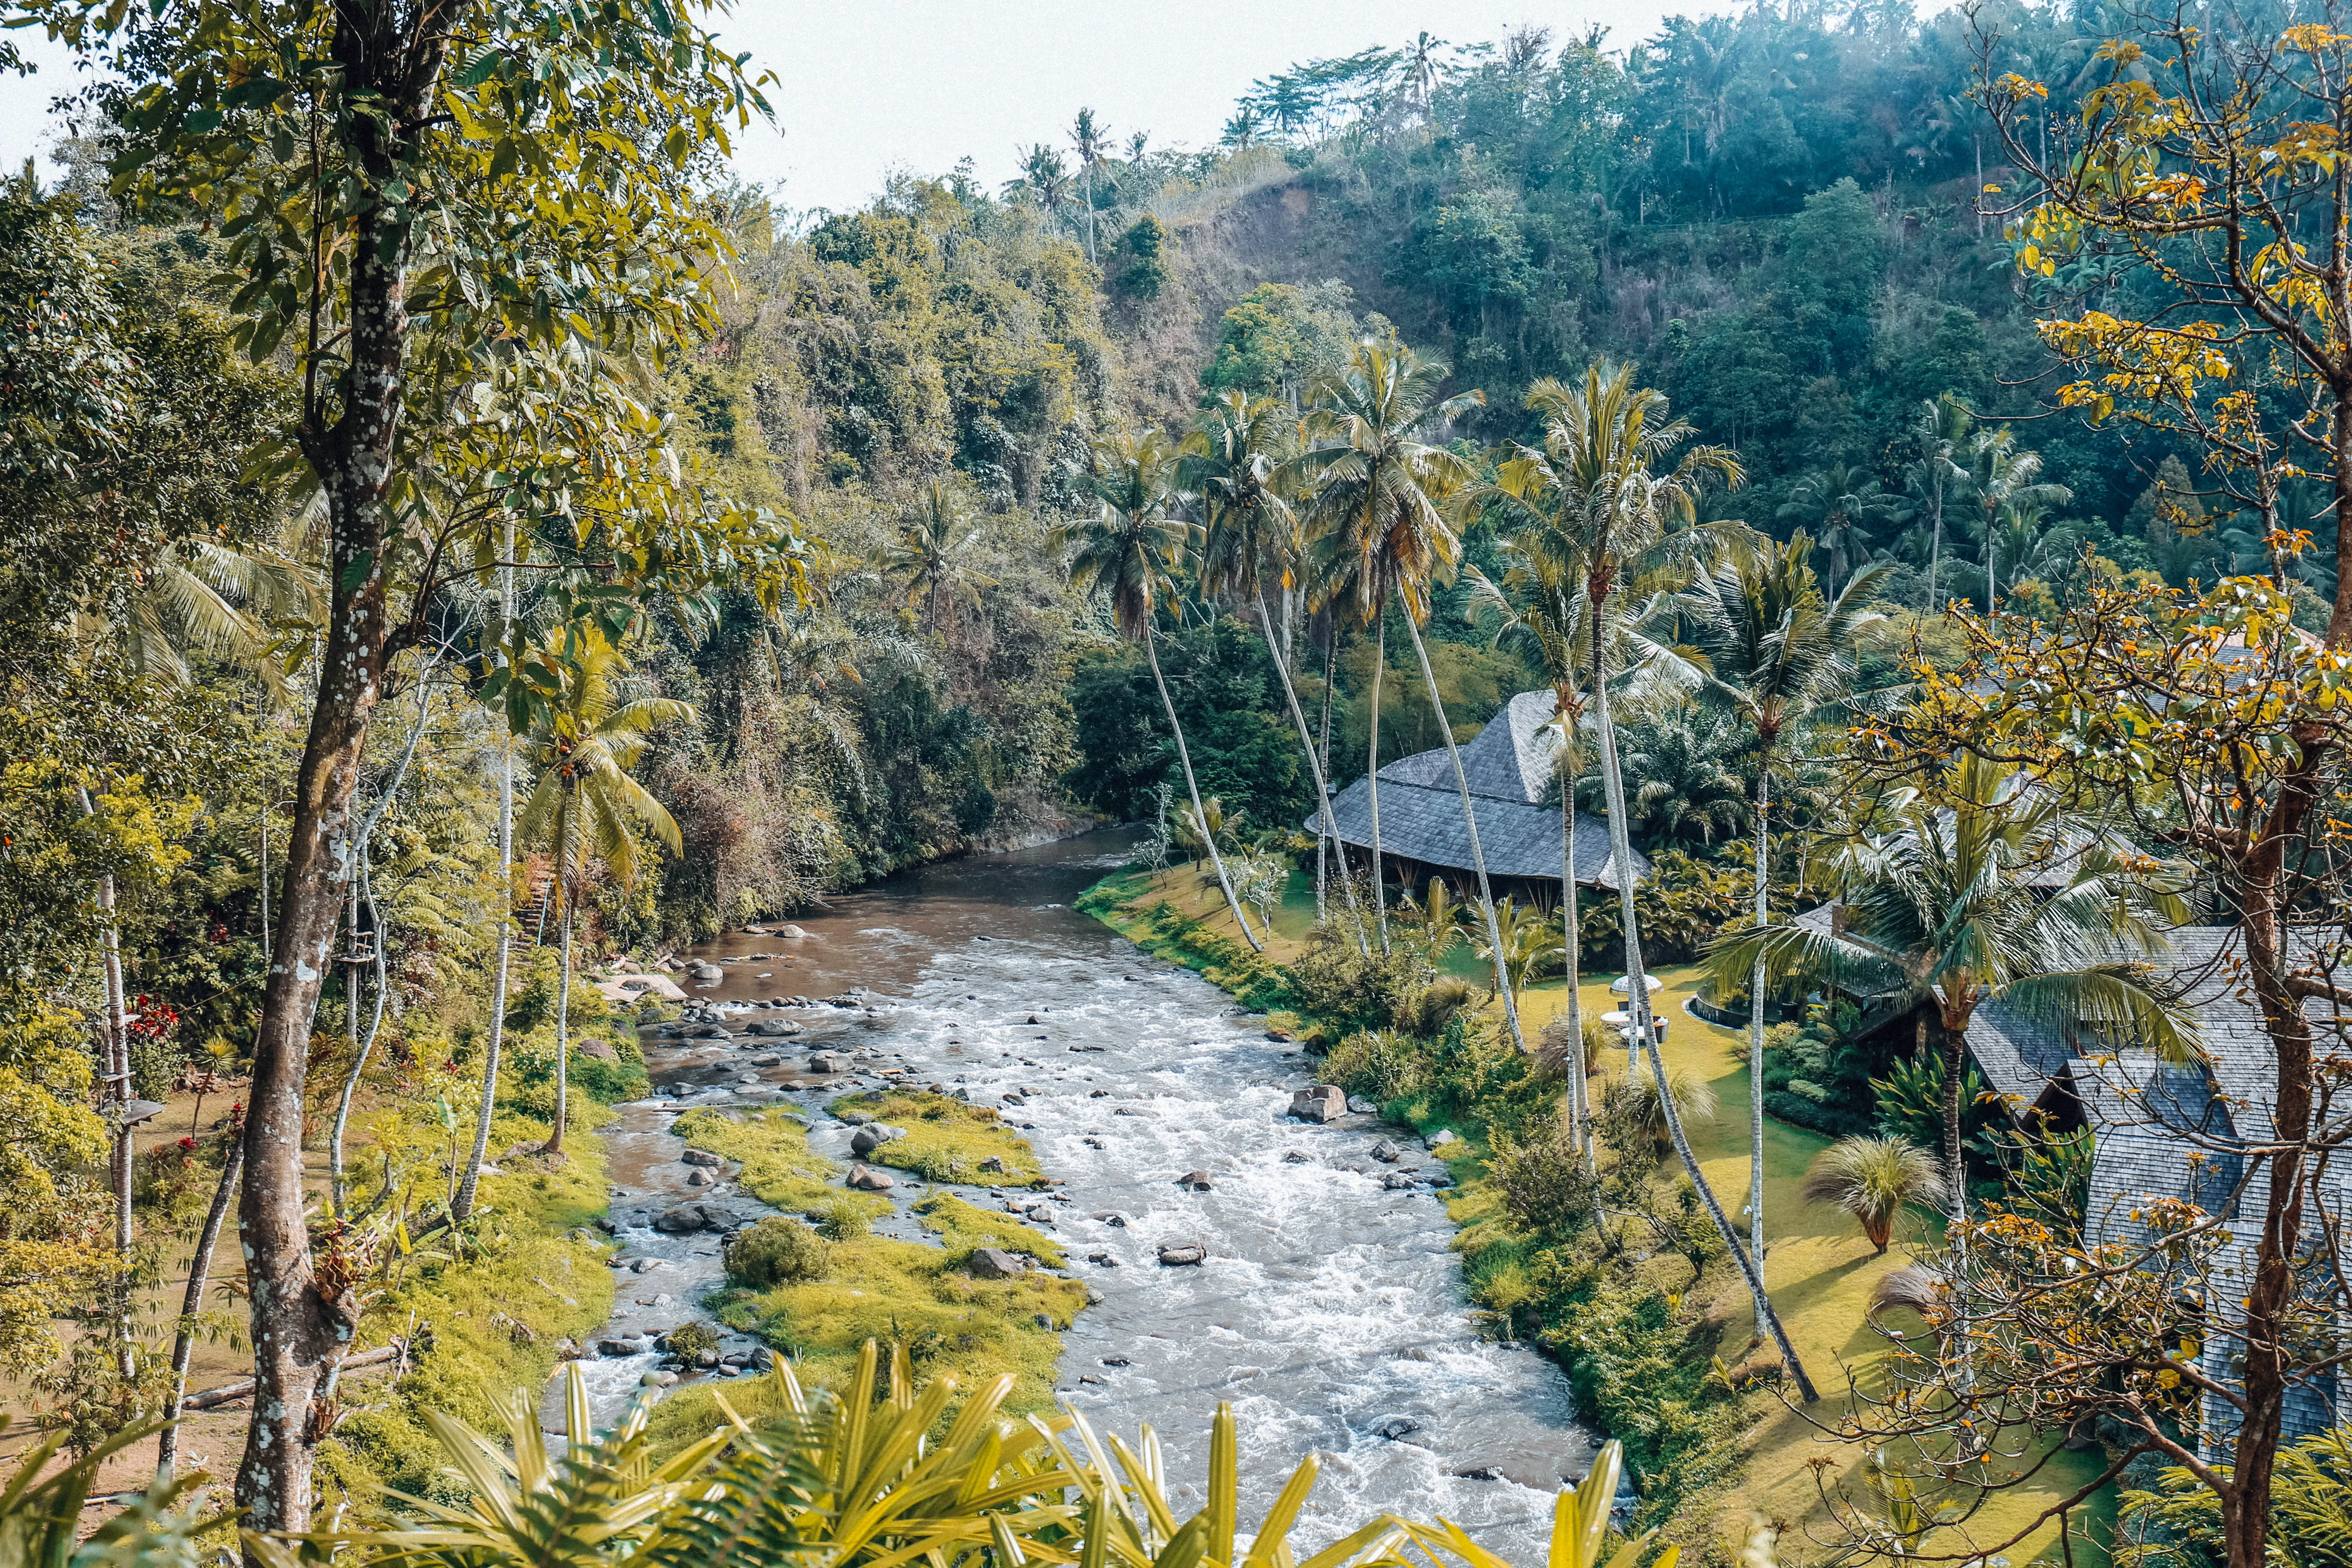 Complete Ubud  Travel Guide The Best Things to Do in Ubud  